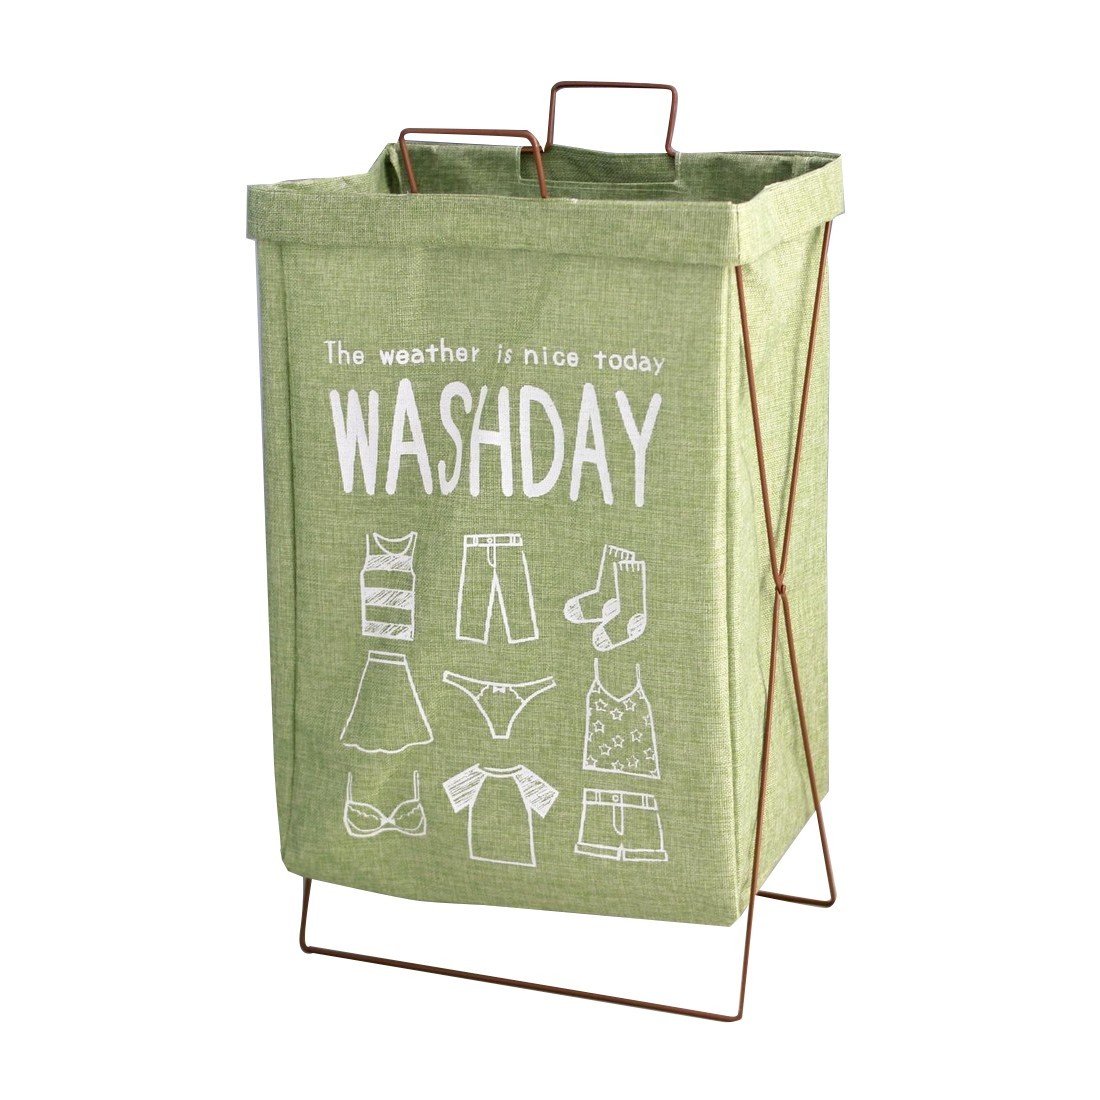  laundry basket iron frame folding storage basket bag bus room bed room WASHDAY cover none green 